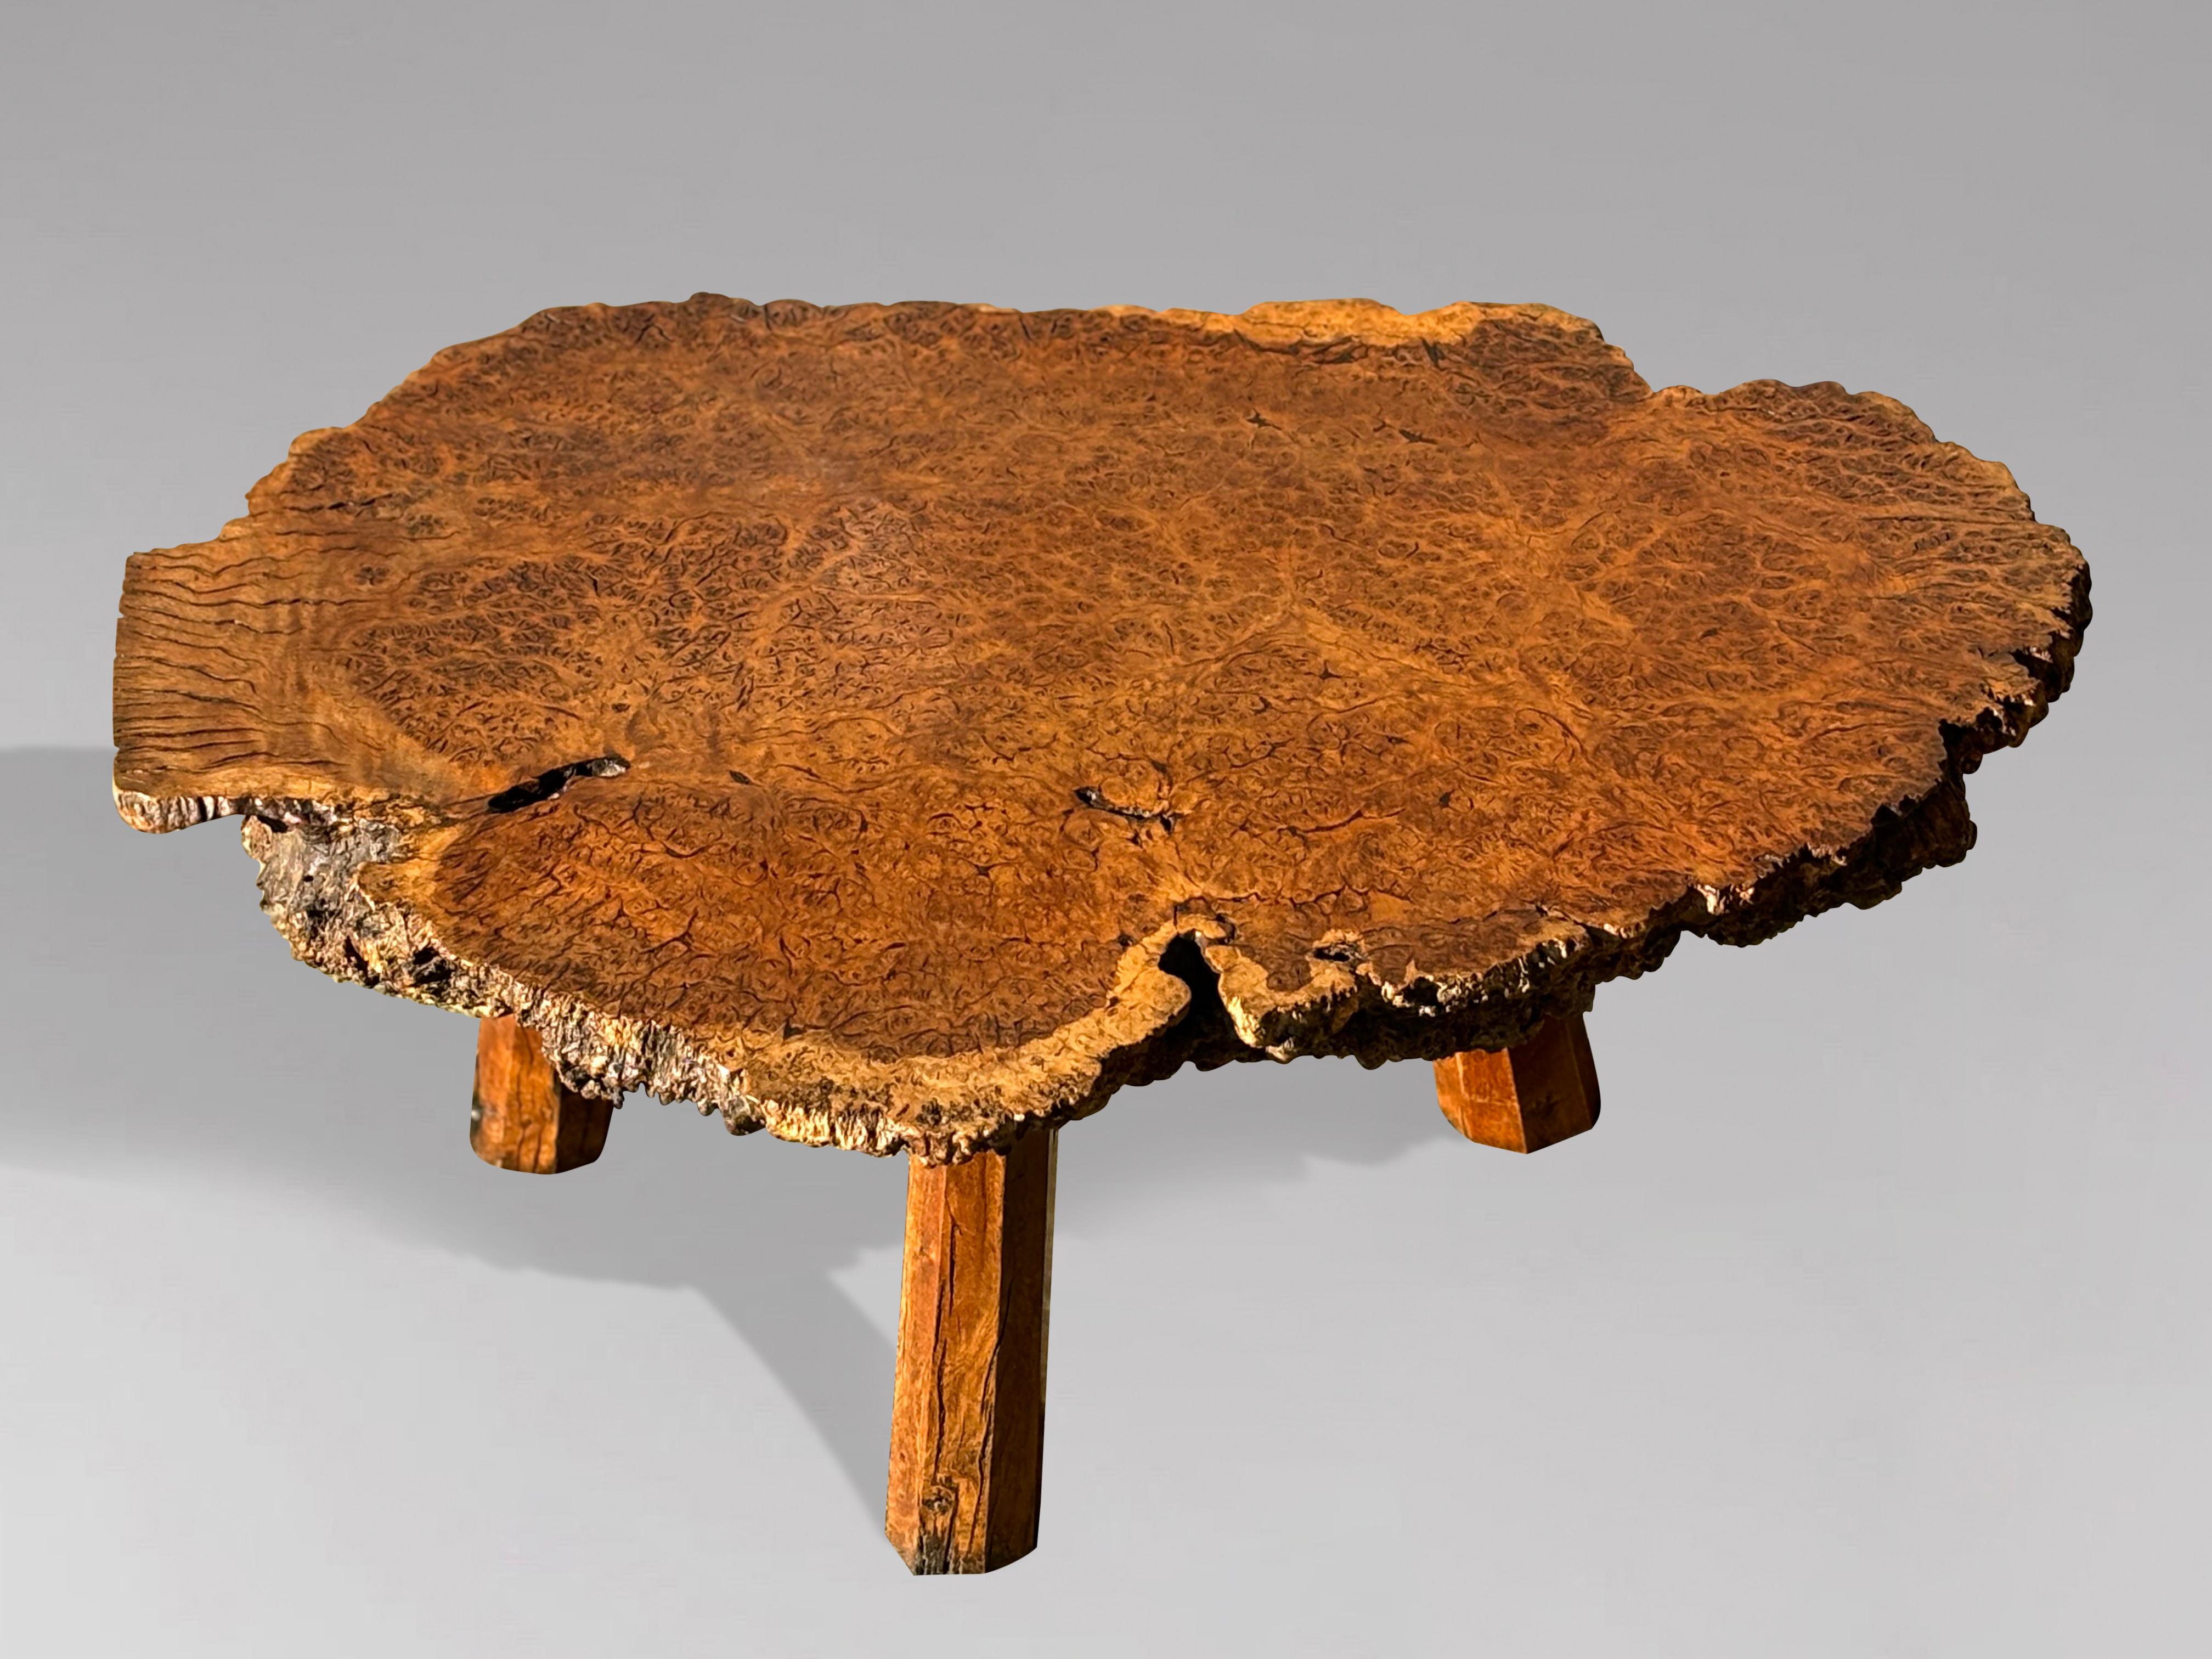 A late 19th century, Victorian beautiful English pollard oak chunky coffee table or low side table. This quality low coffee table was crafted with meticulous attention to detail, standing on tripod oak legs. This exquisite piece is a harmonious